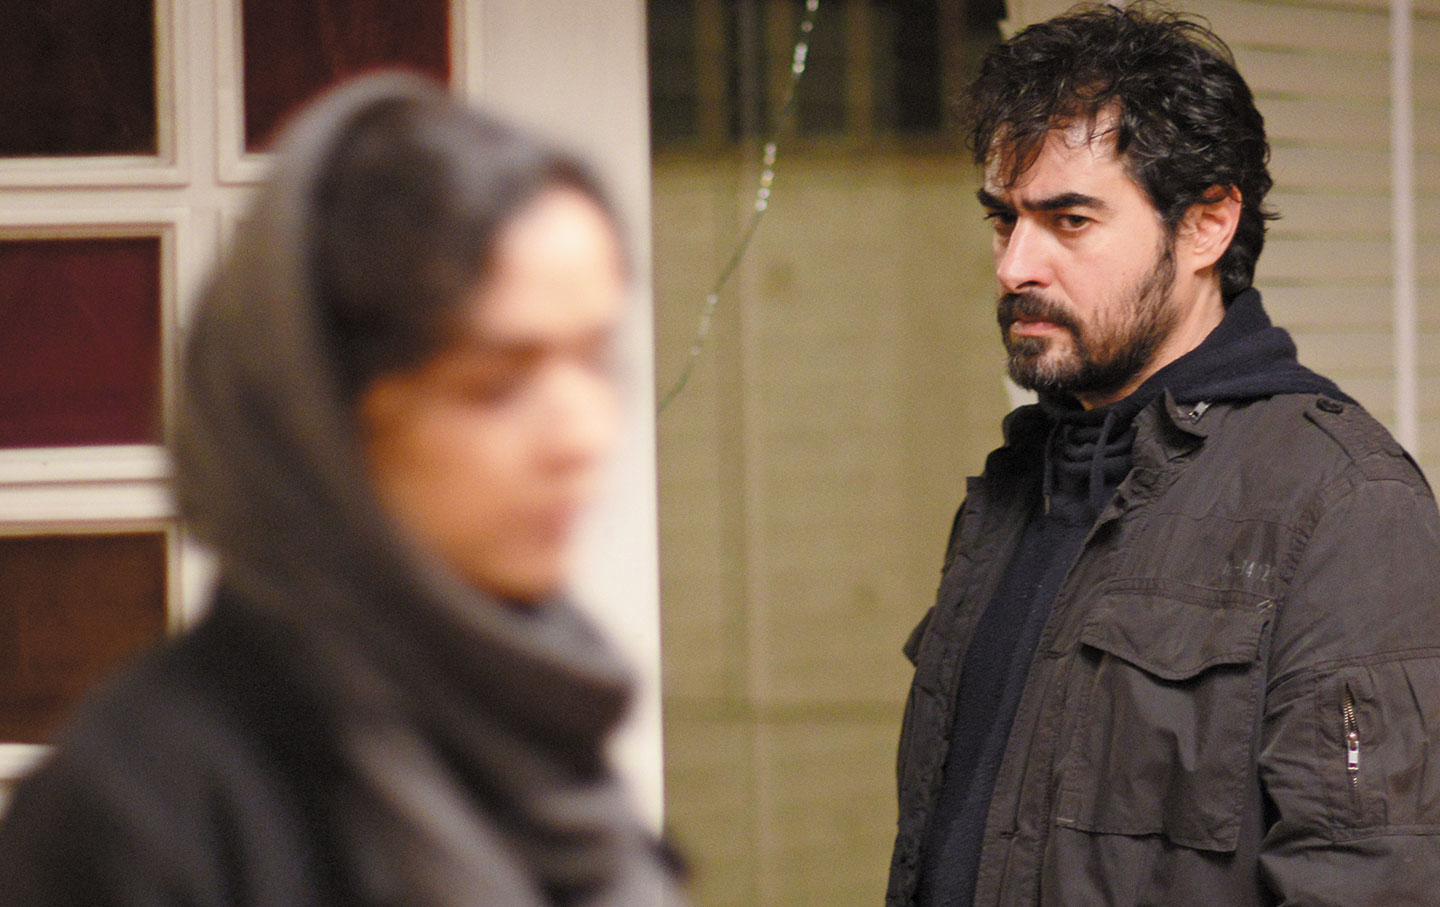 Is ‘The Salesman’ the Best Foreign-Language Film of 2016?